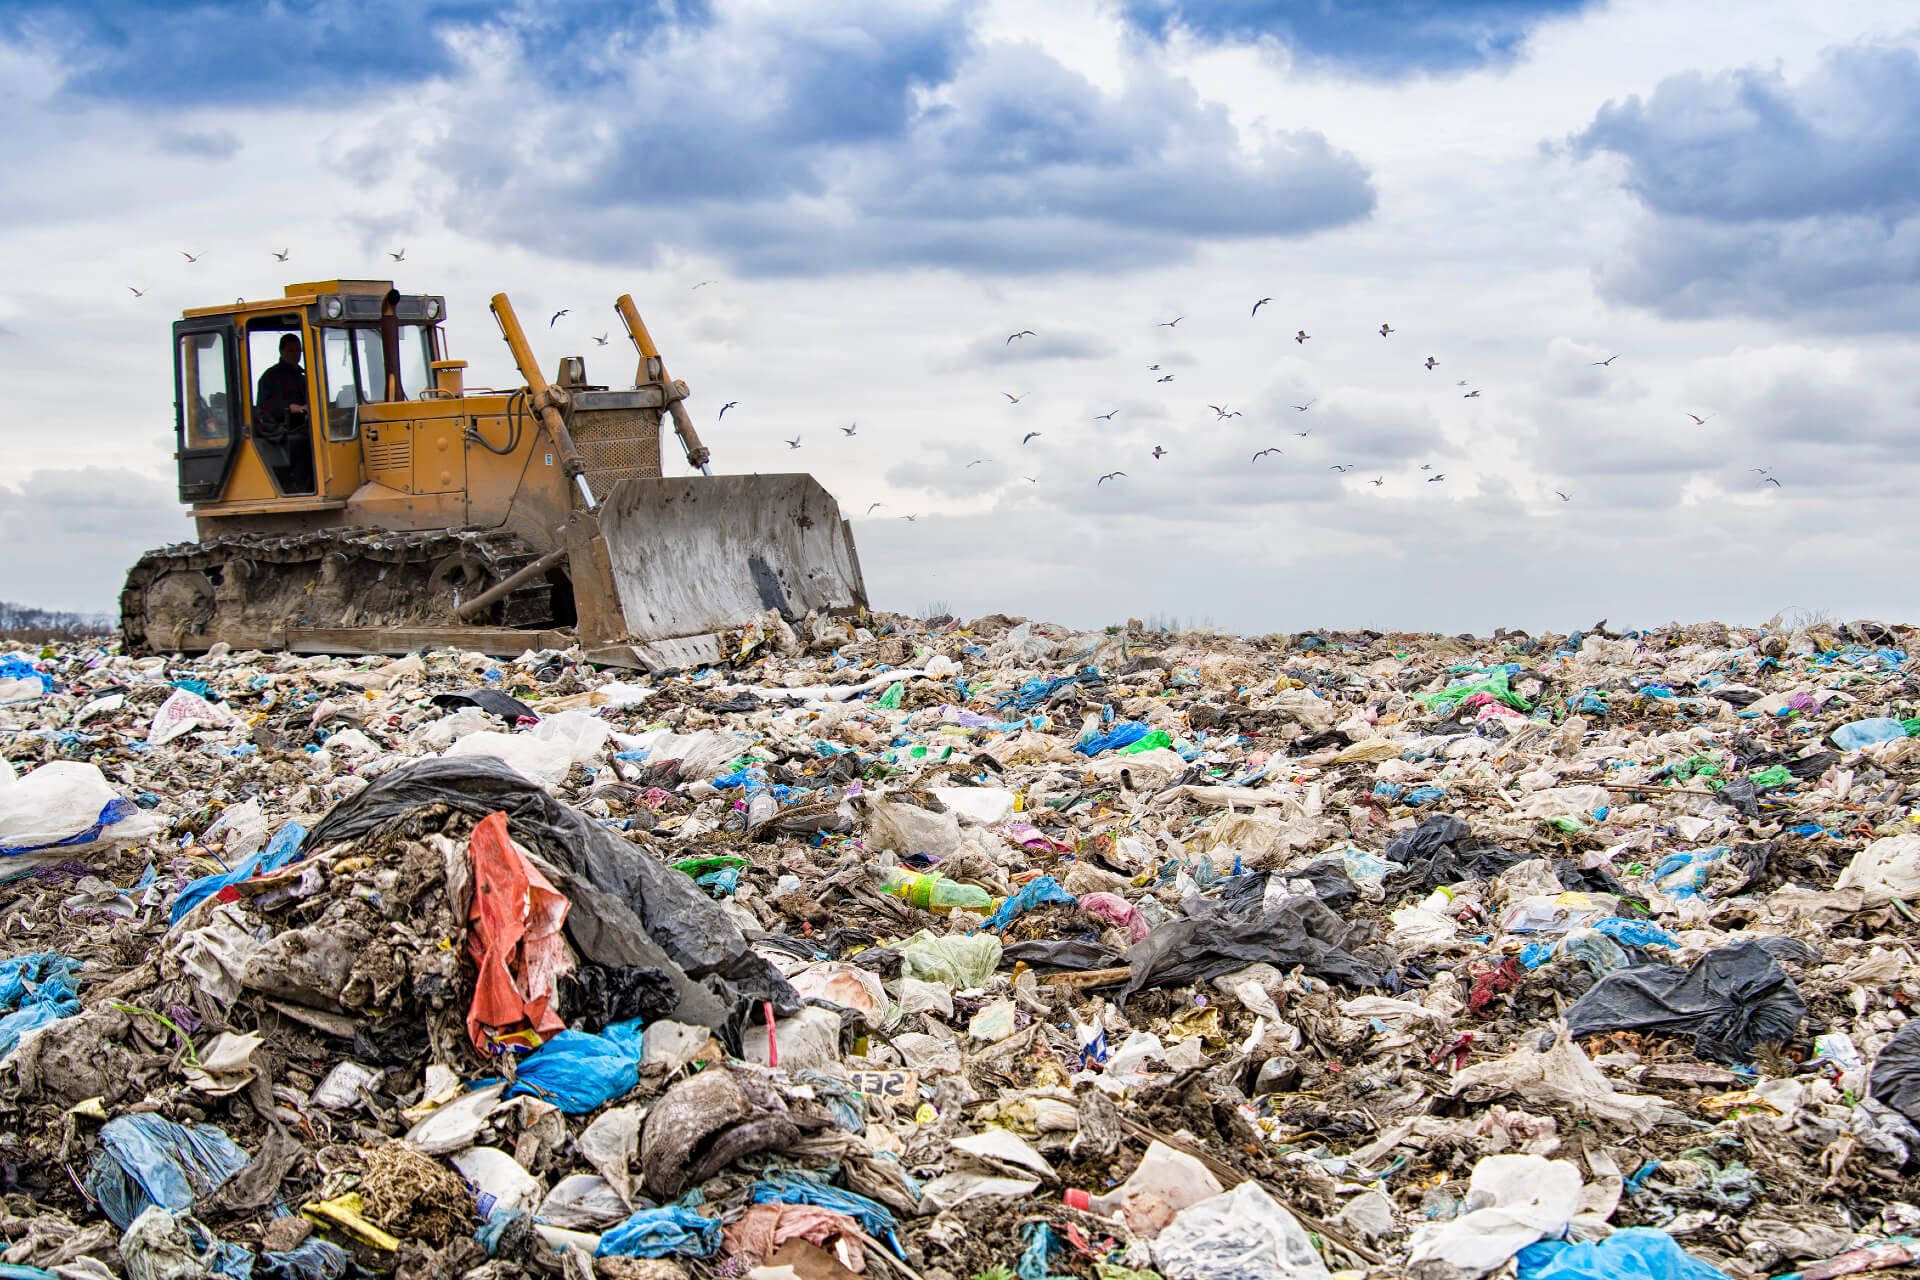 wasteful consumption impacts our environment